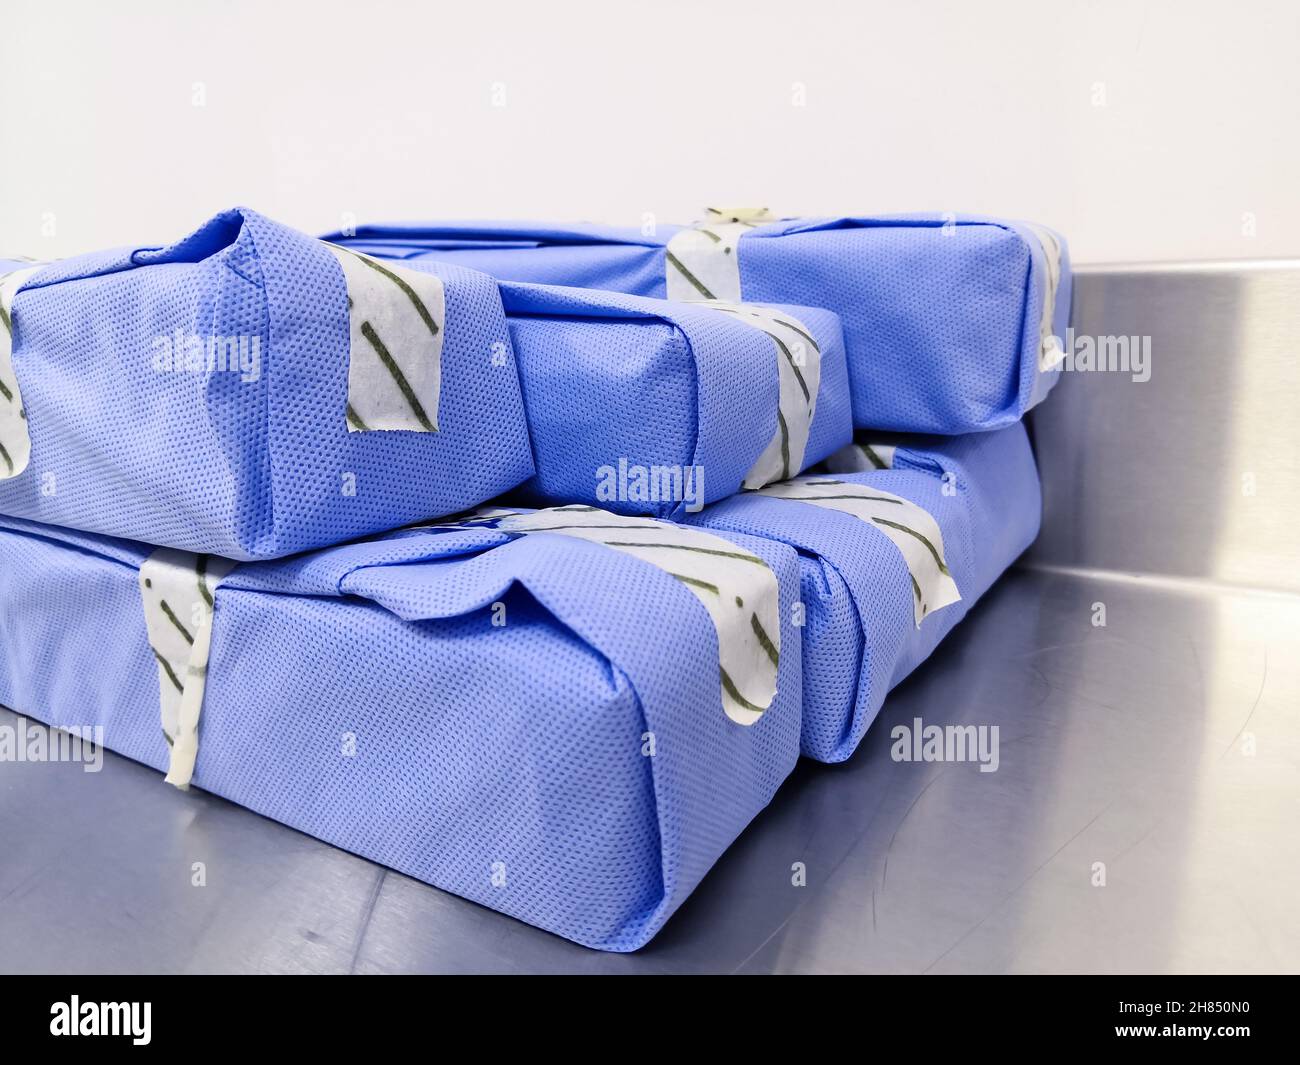 Closeup Image Of Sterilized Blue Wrapped Telescope Packages Stack On Top. Selective Focus Stock Photo